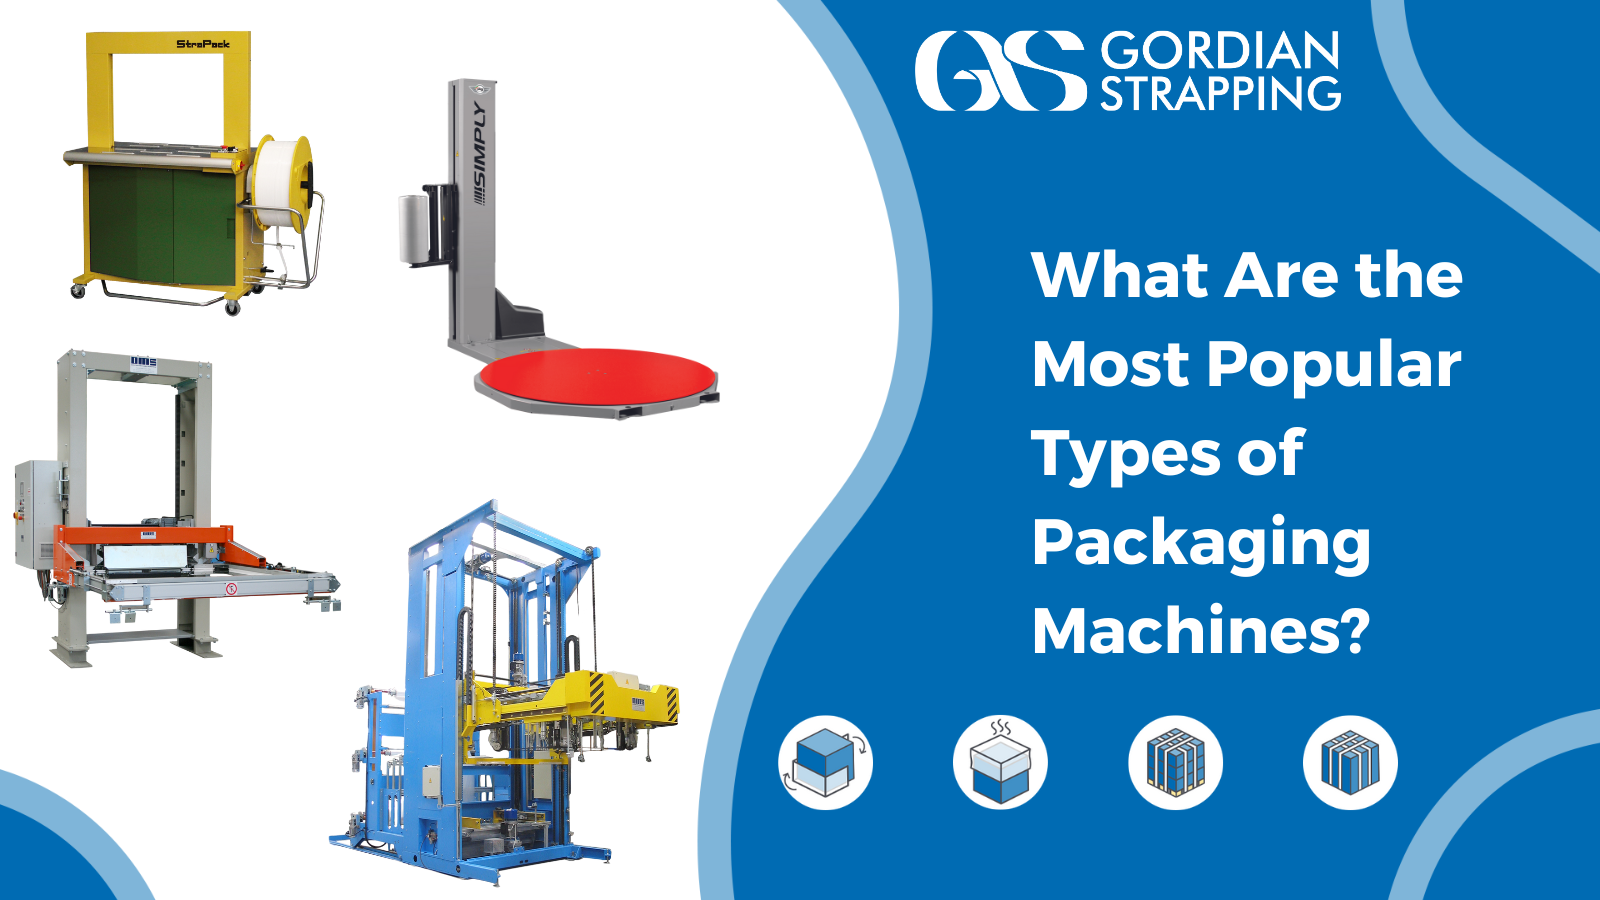 What Are the Most Popular Types of Packaging Machines?